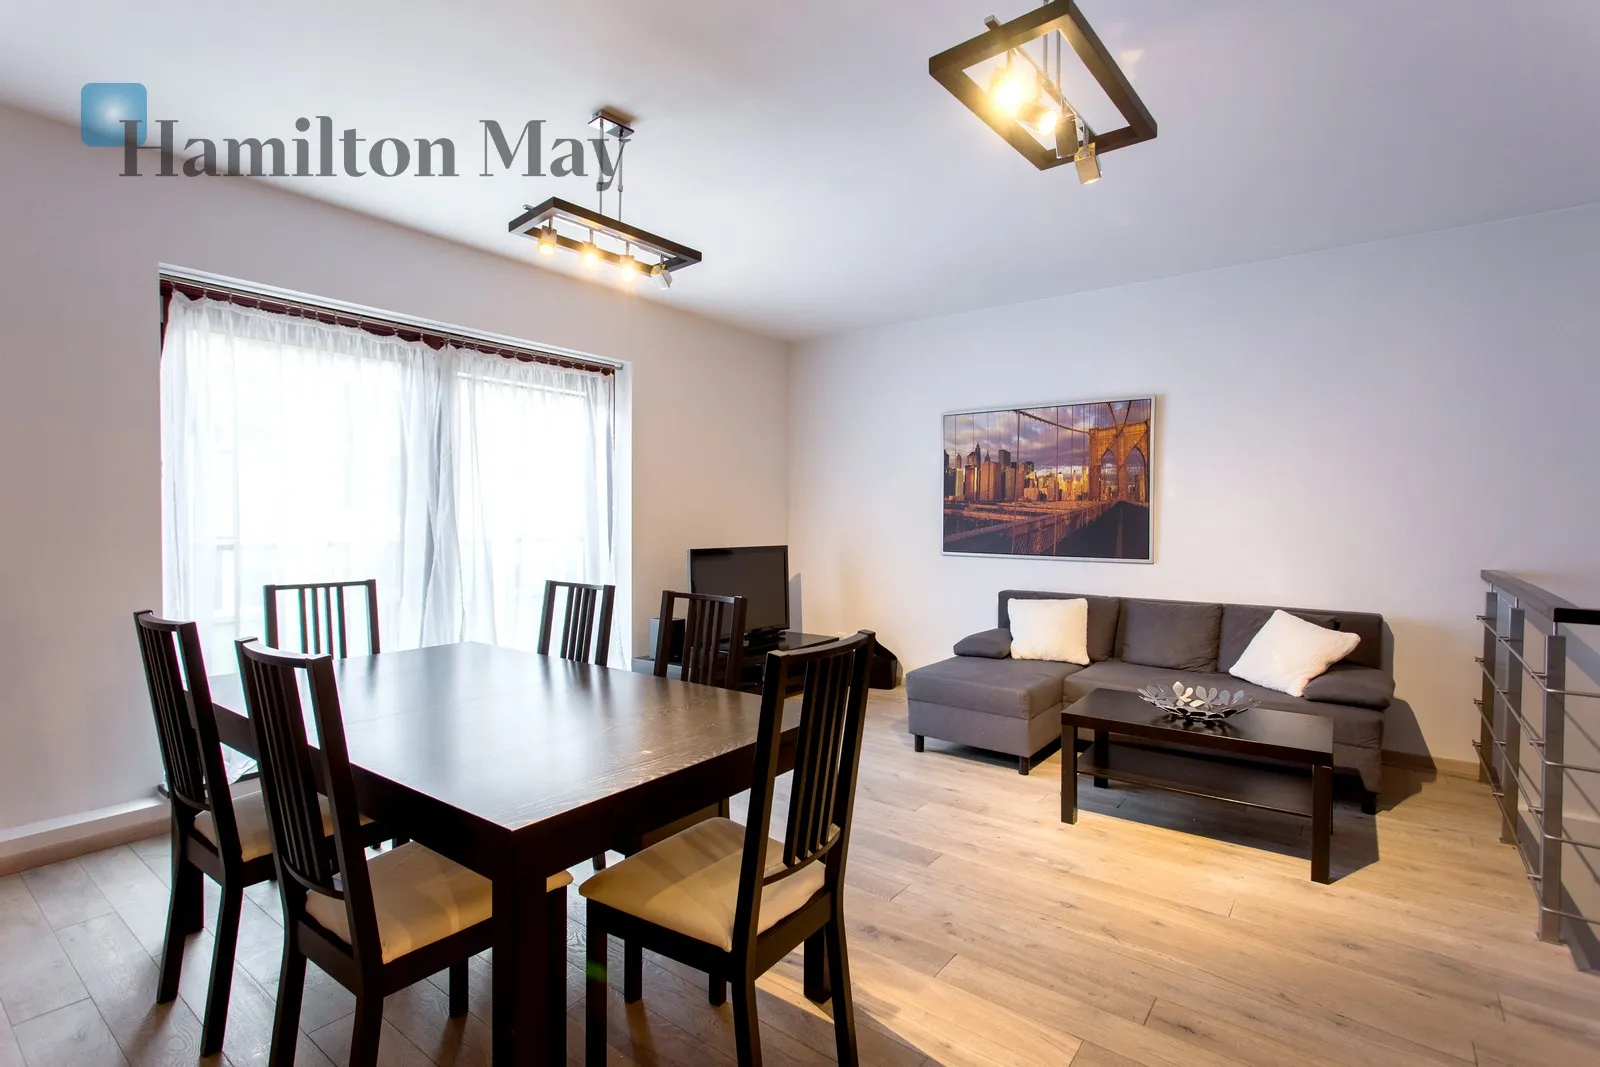 Duplex 3 bedroom apartment in the Old Town - slider